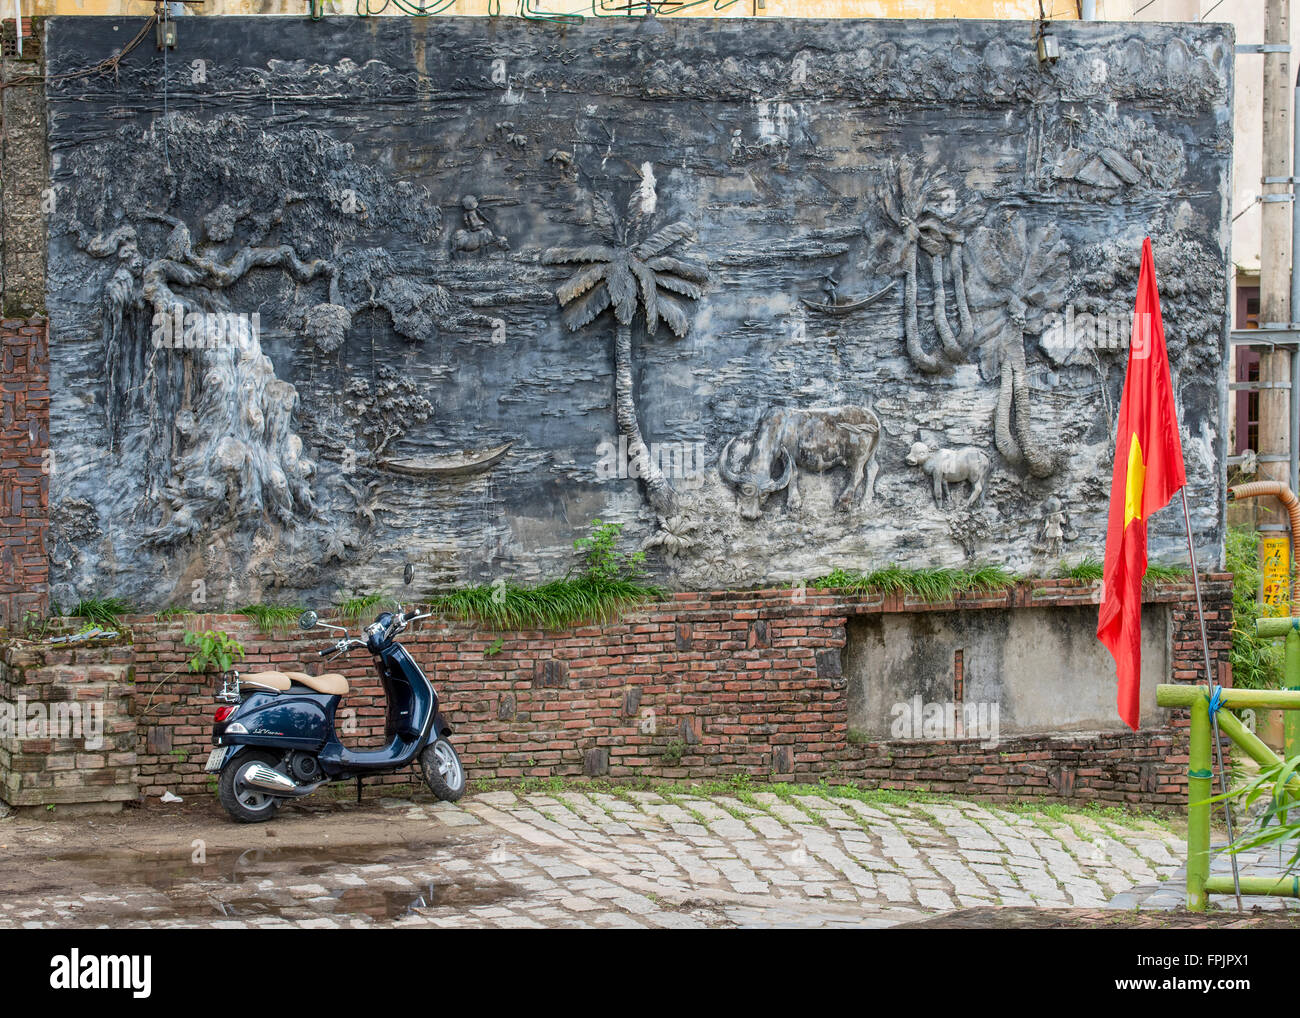 Hoi An, Vietnam, street scene with scooter, Vietnamese flag and a mural showing a country scene and seascape Stock Photo